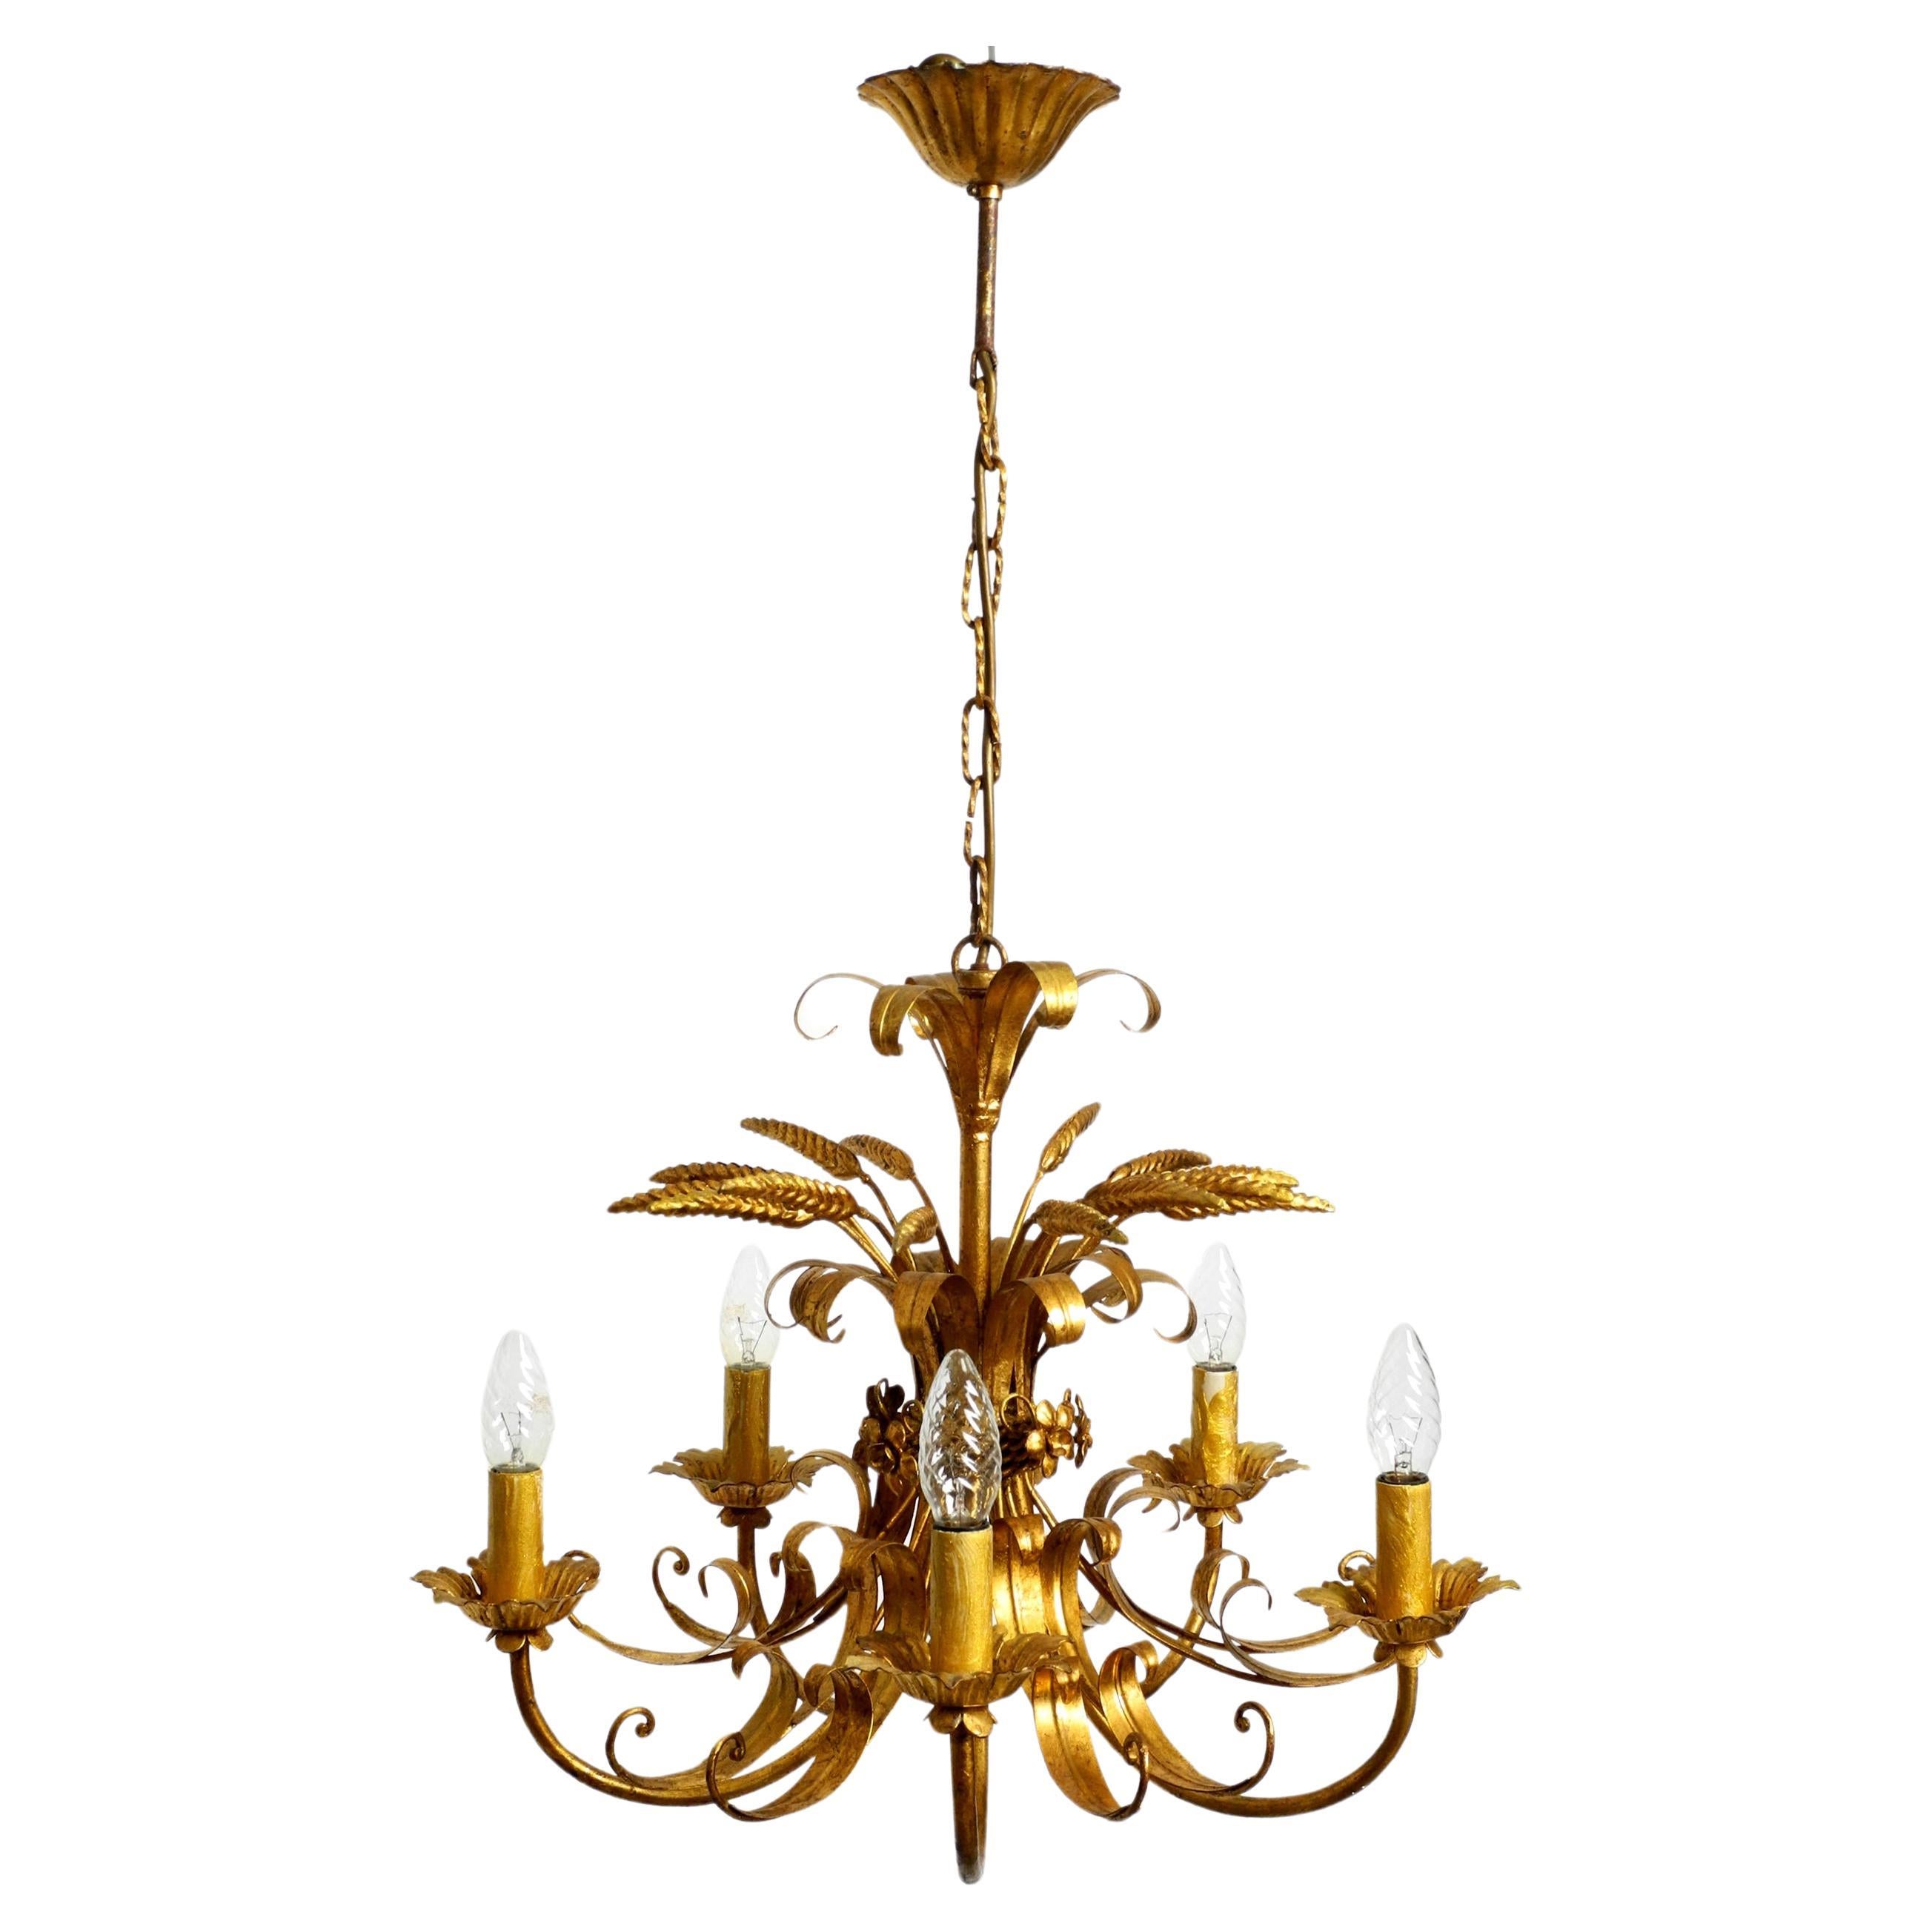 Beautiful 1970s gold-plated large 5-armed metal chandelier by Hans Kögl